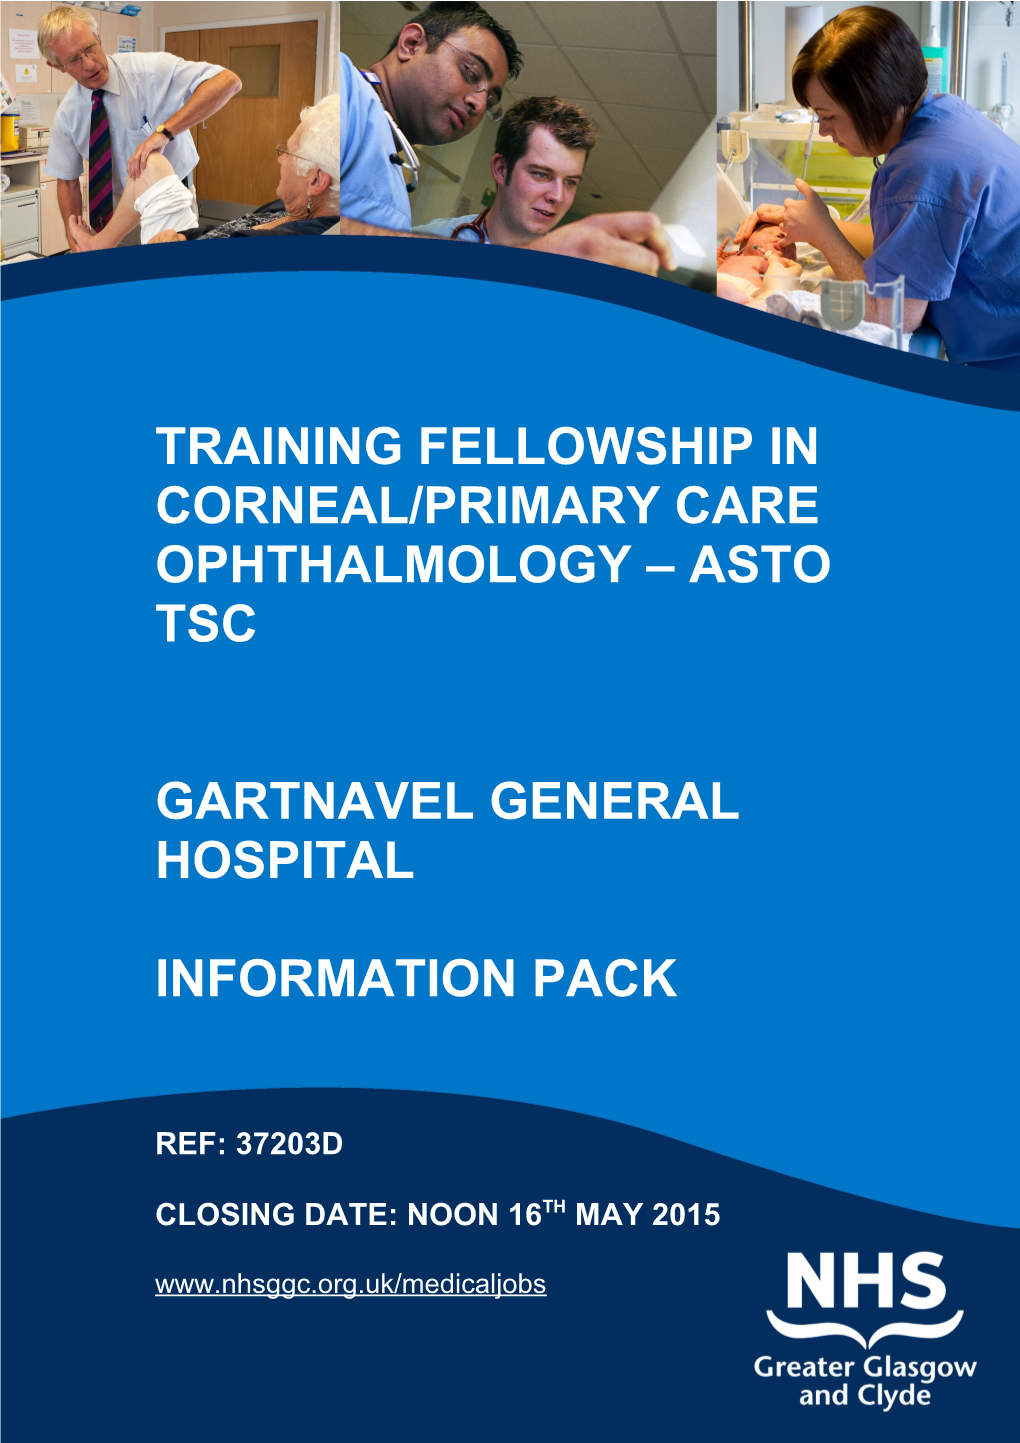 Training Fellowship in Corneal/Primary Care Ophthalmology Asto Tsc